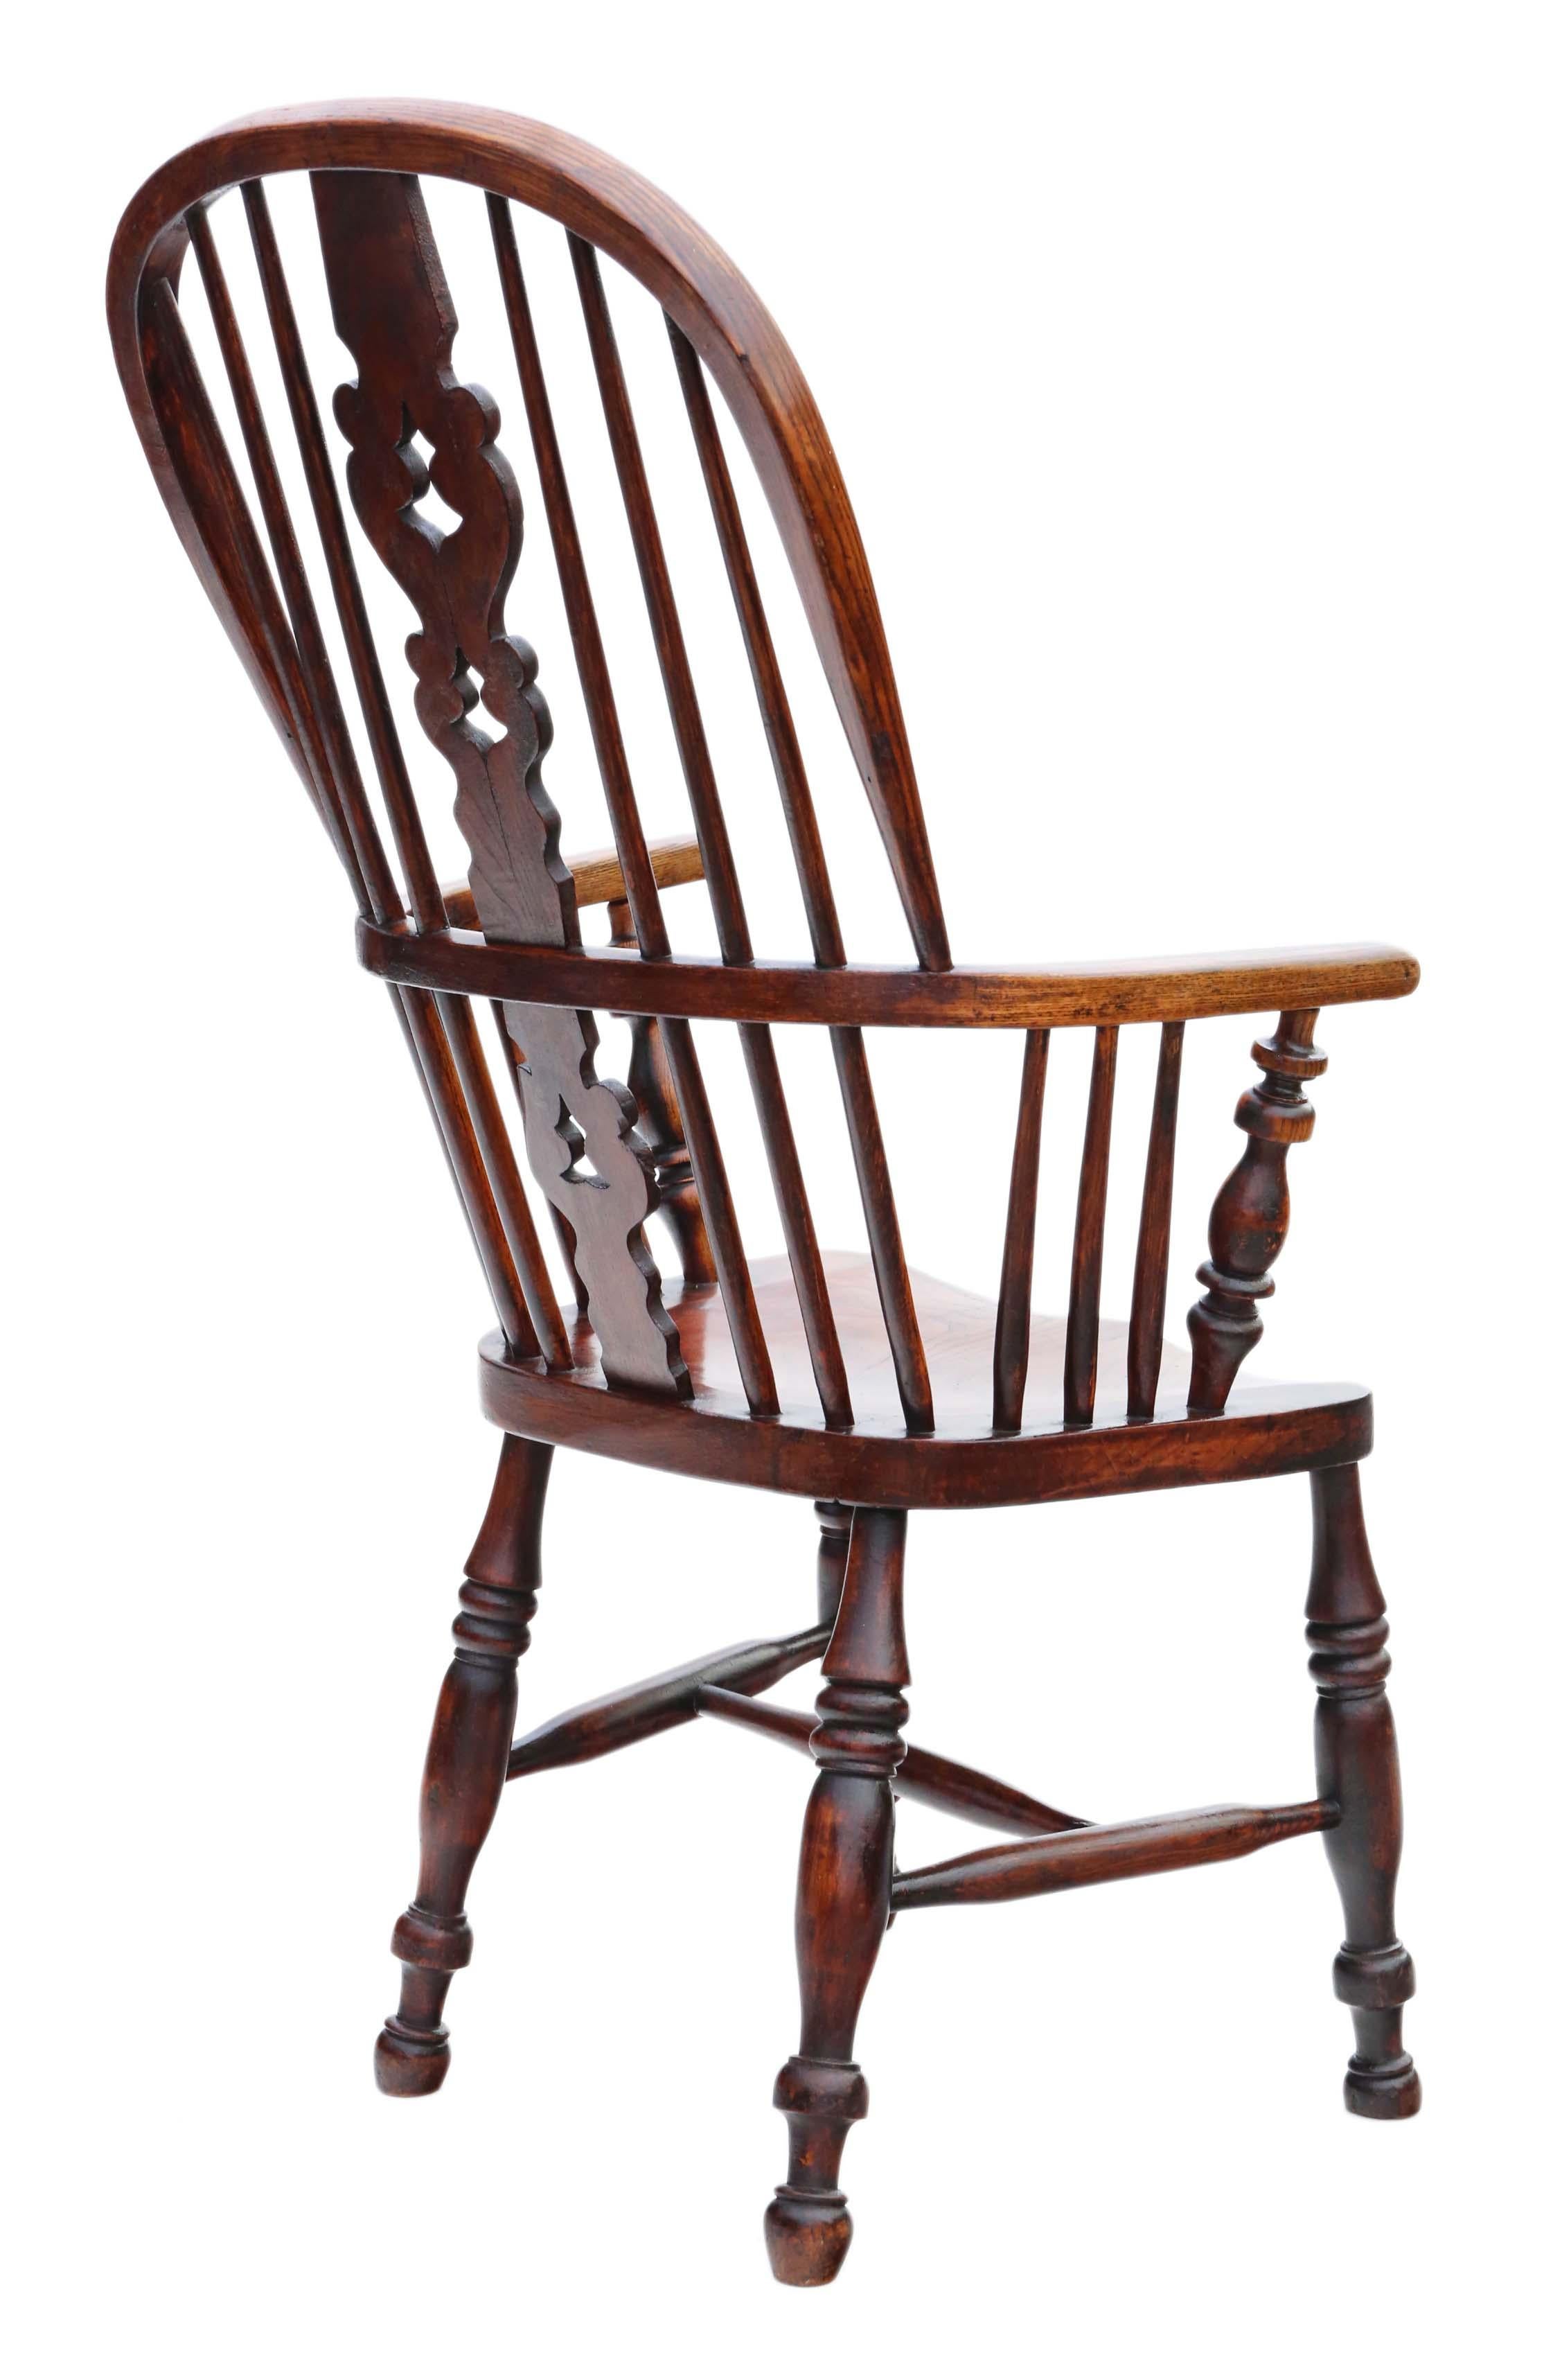 Mid-19th Century Antique Victorian Ash and Elm Windsor Chair Dining Armchair For Sale